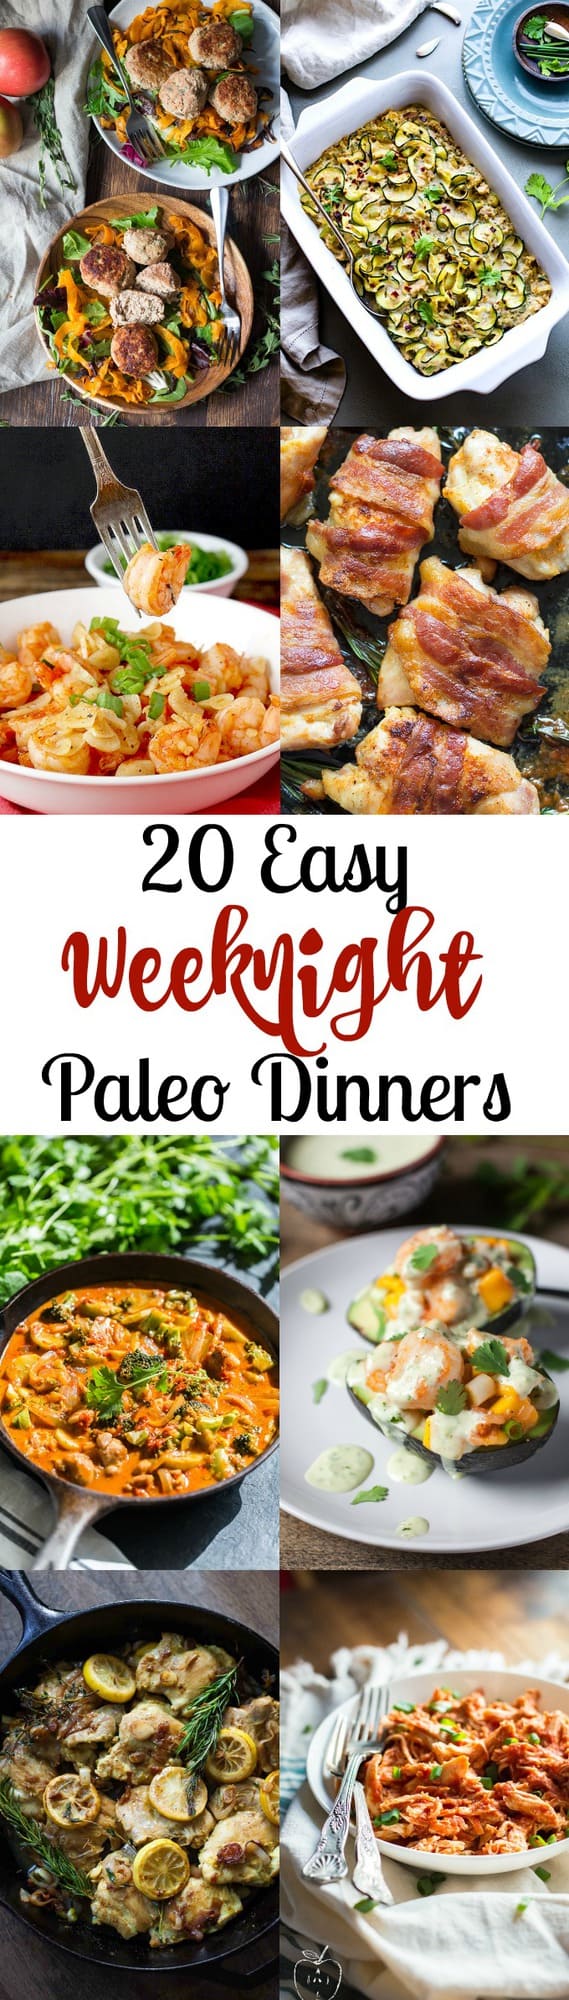 20 Easy Paleo Dinners for Weeknights | The Paleo Running Momma